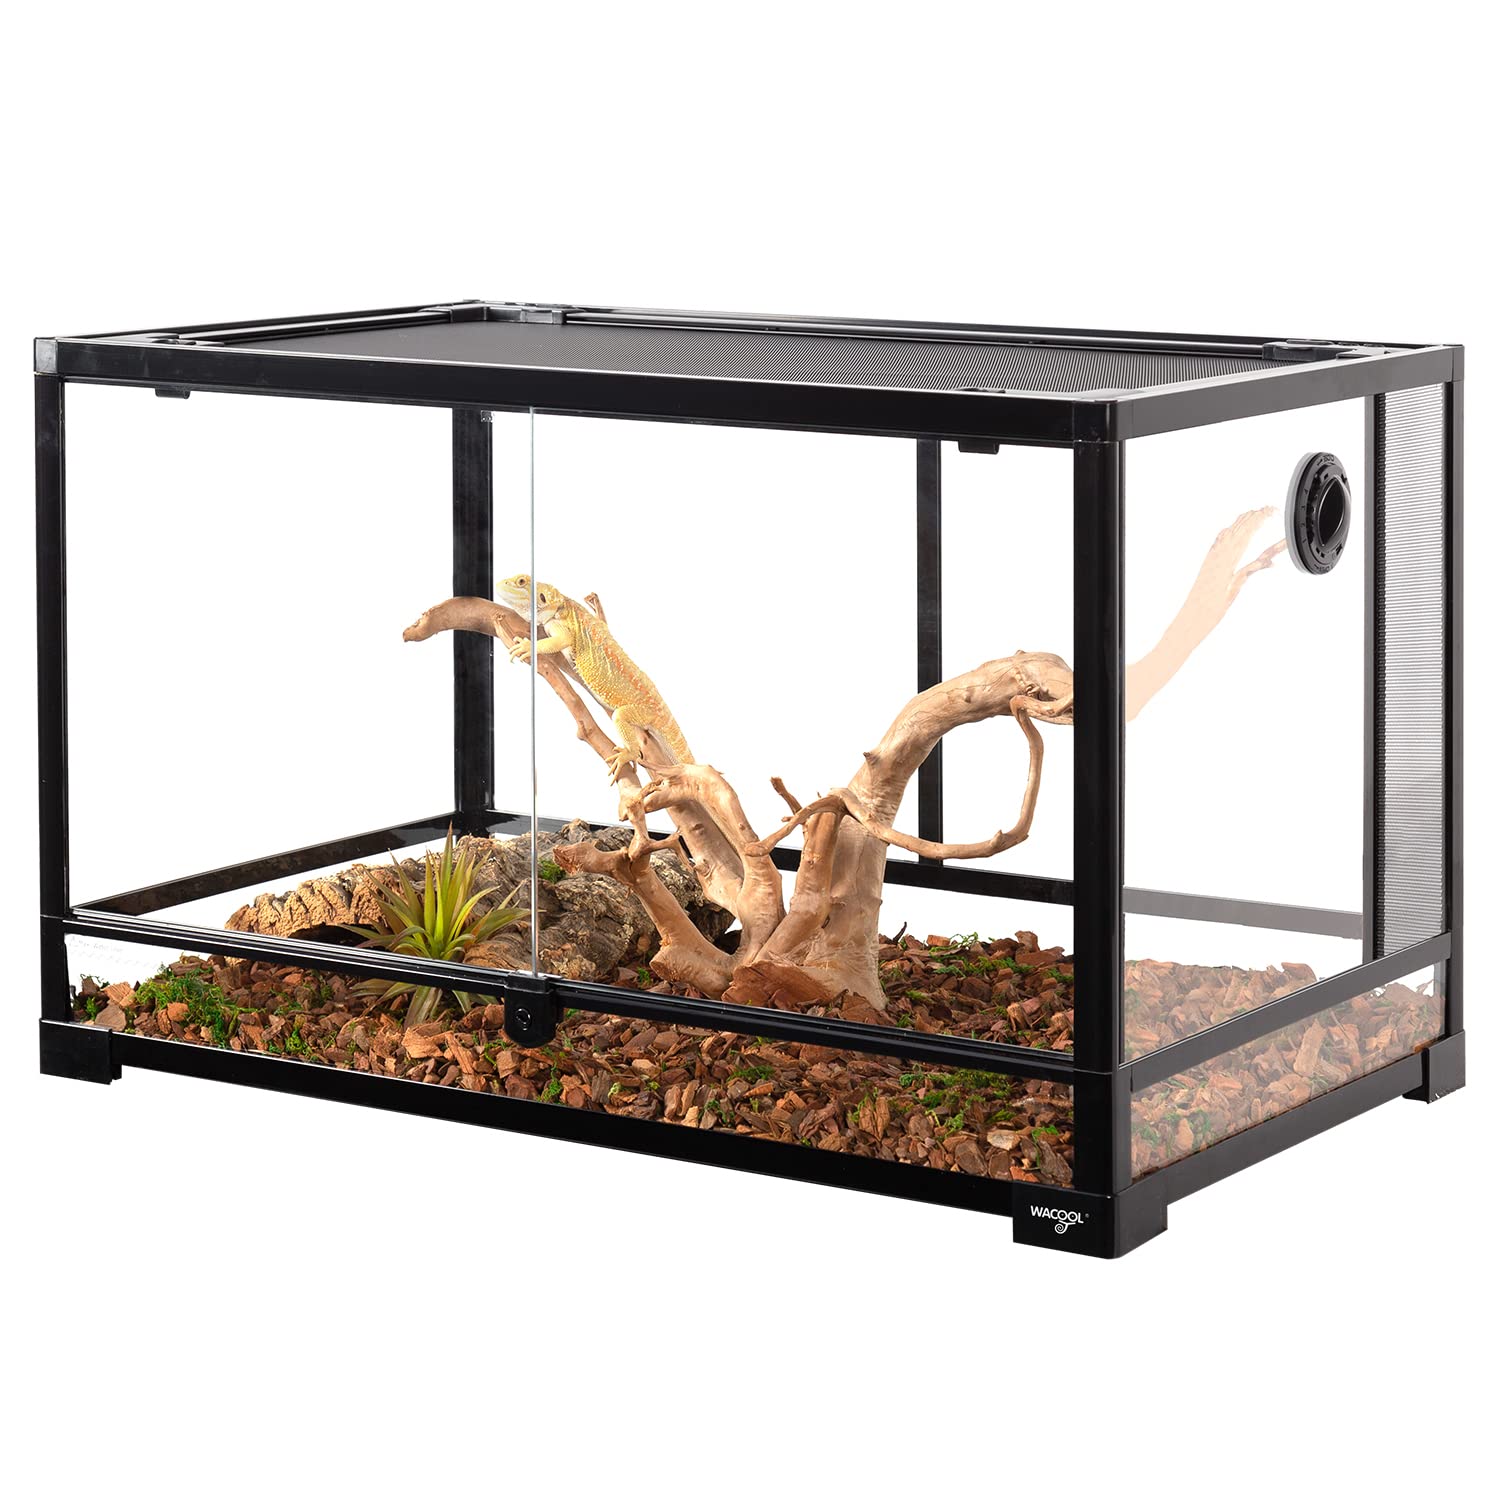 What Temperature Should Bearded Dragon Tank Be? – REPTI ZOO